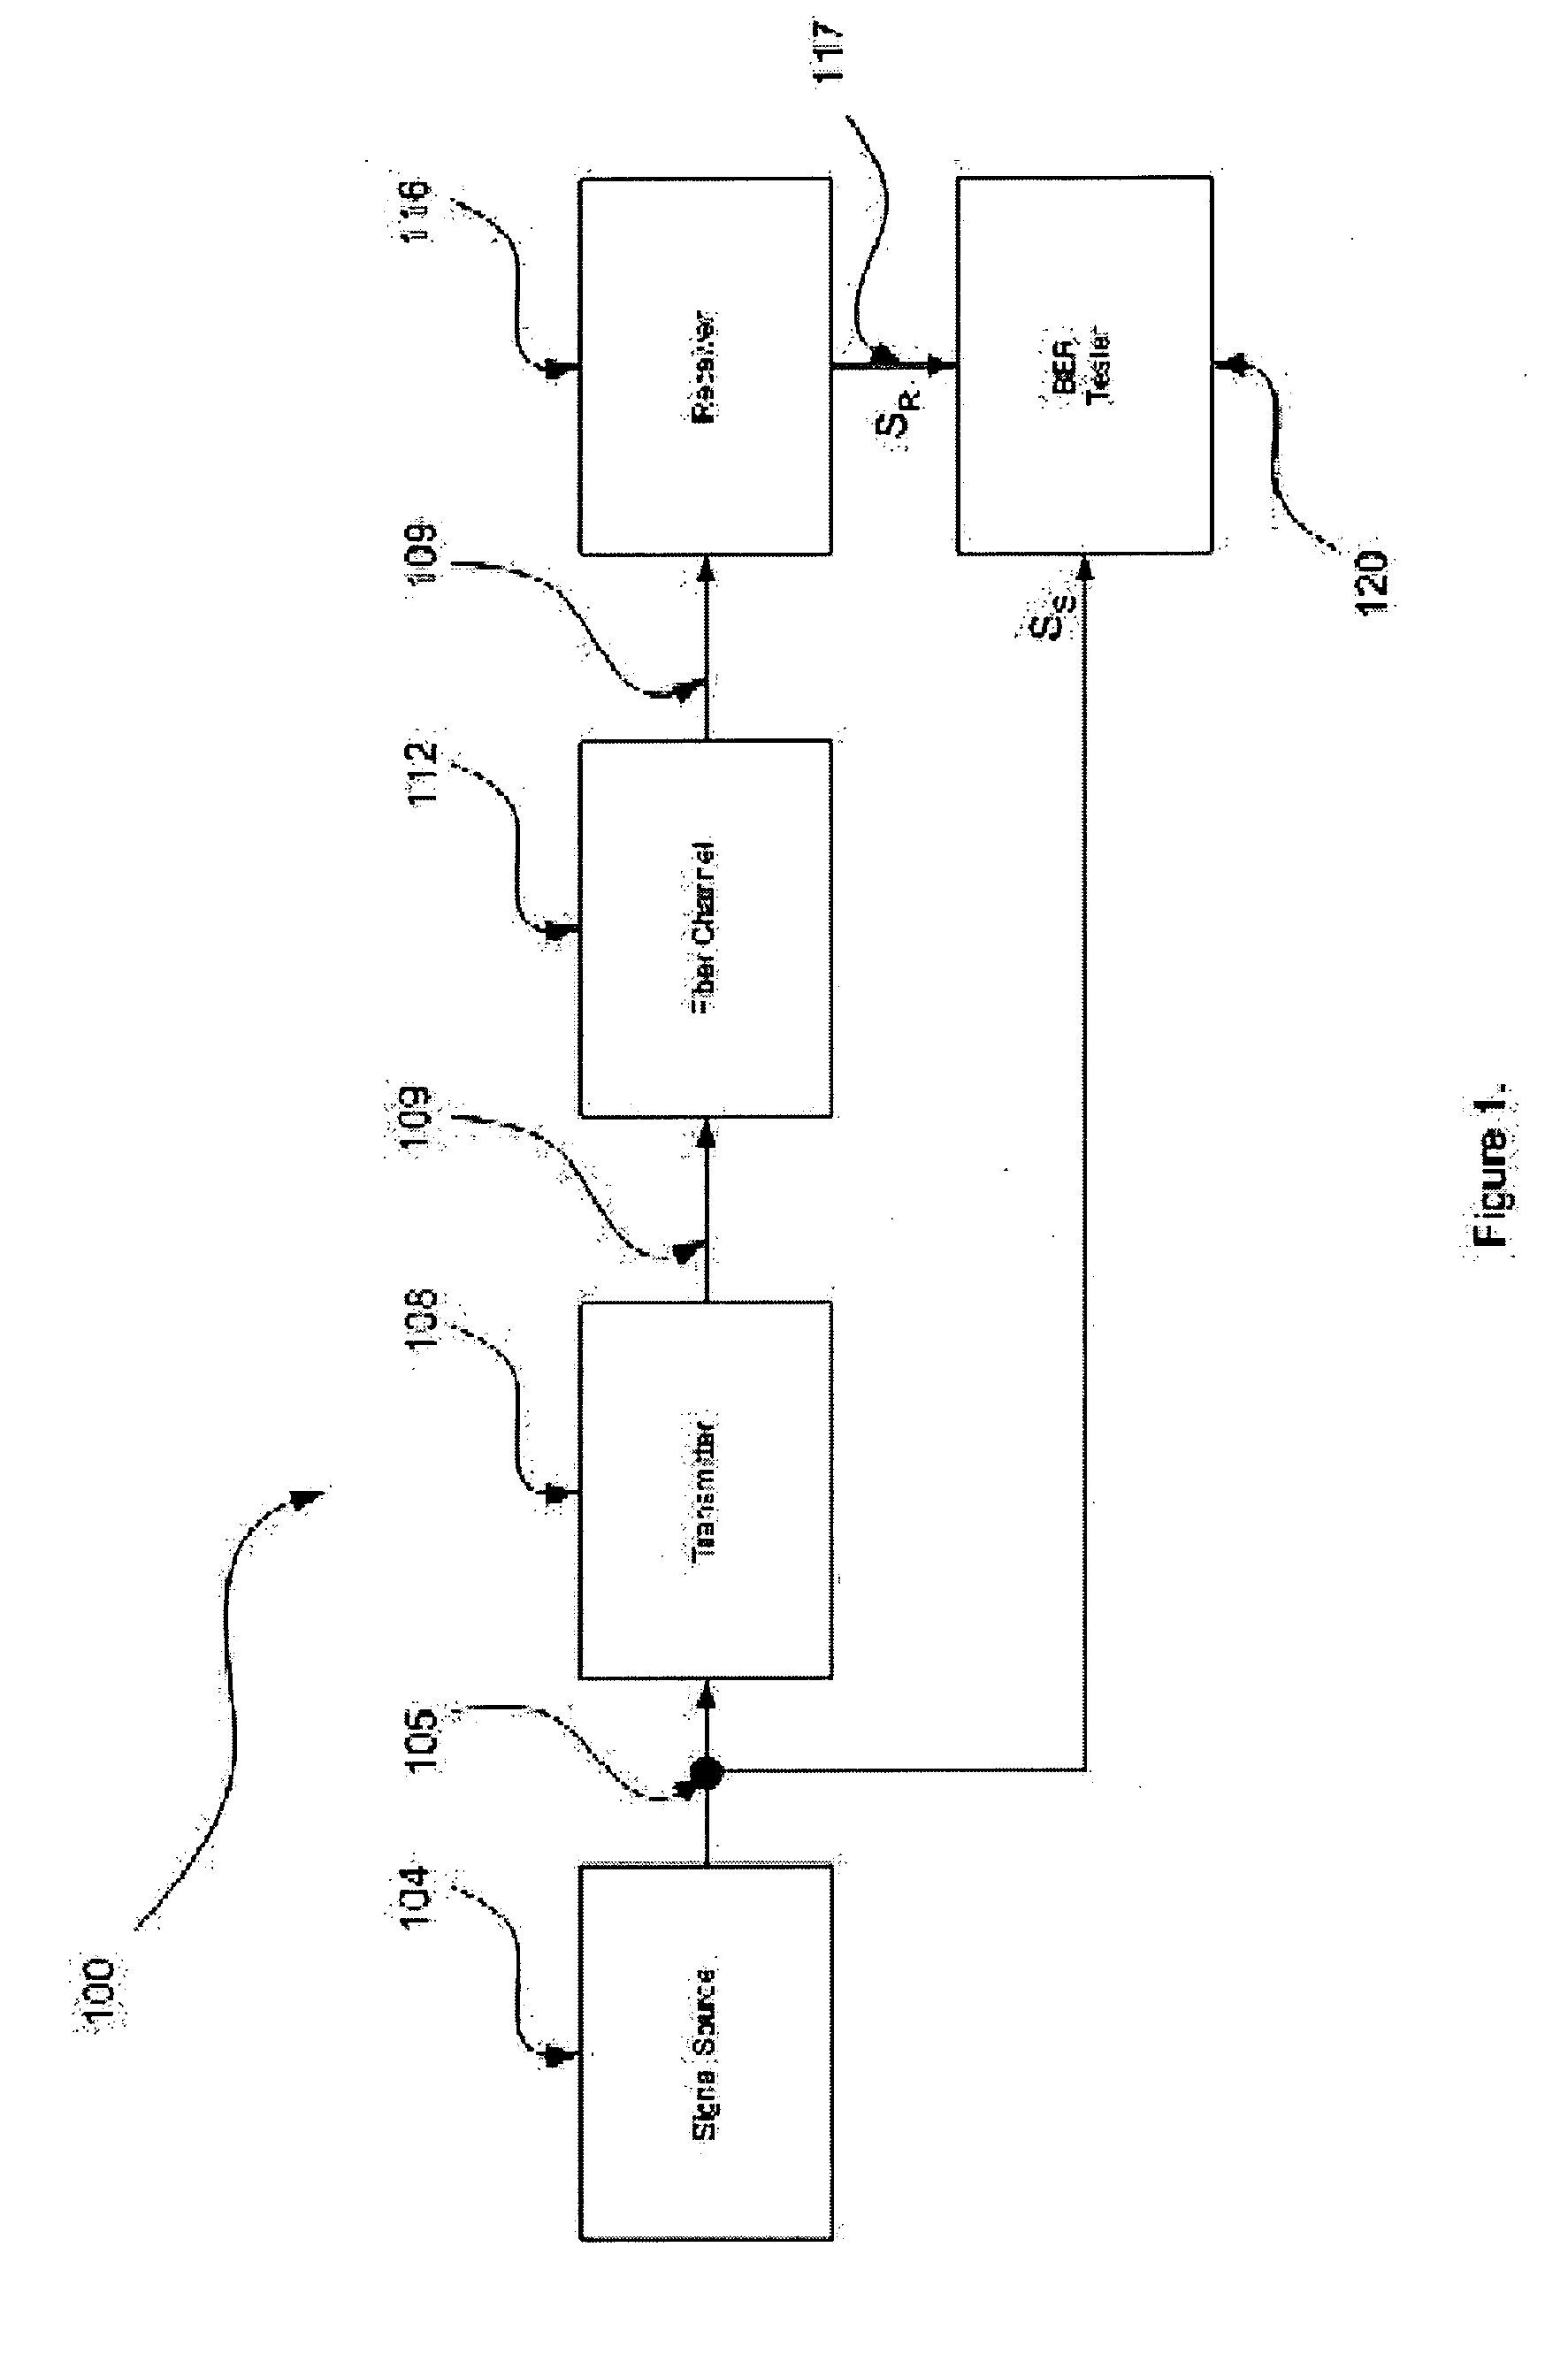 Method and system for determining receiver power for required bit error rate